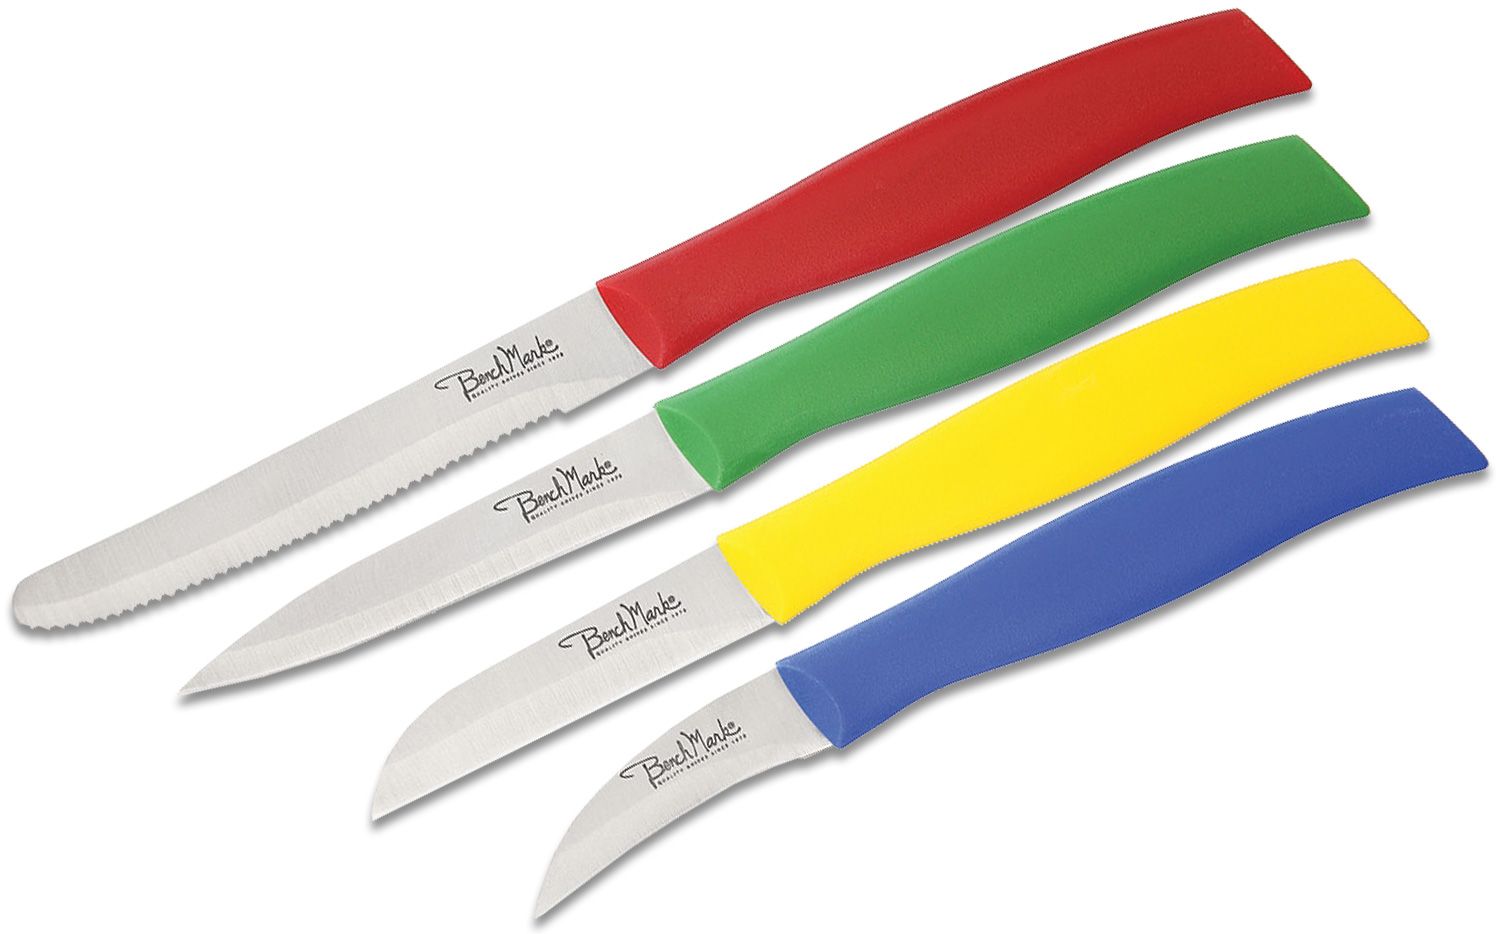 Telemacos Reproduceren Minder Benchmark 4 Piece Kitchen Knife Utility Set, Multicolored Synthetic Handles  - KnifeCenter - BMK083 - Discontinued